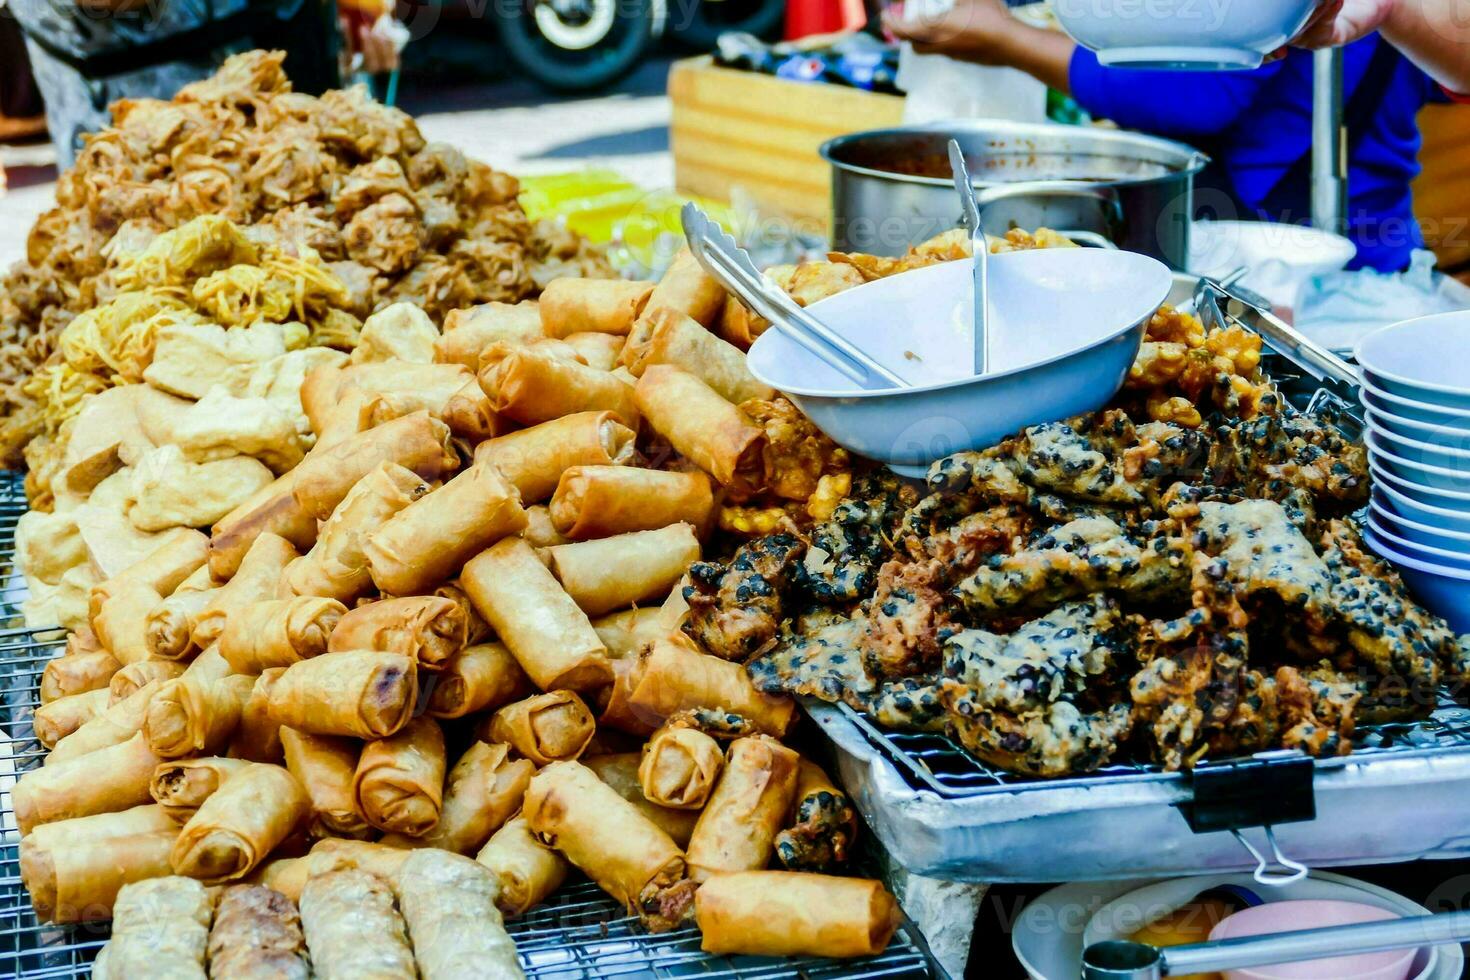 a variety of food is displayed on a table photo